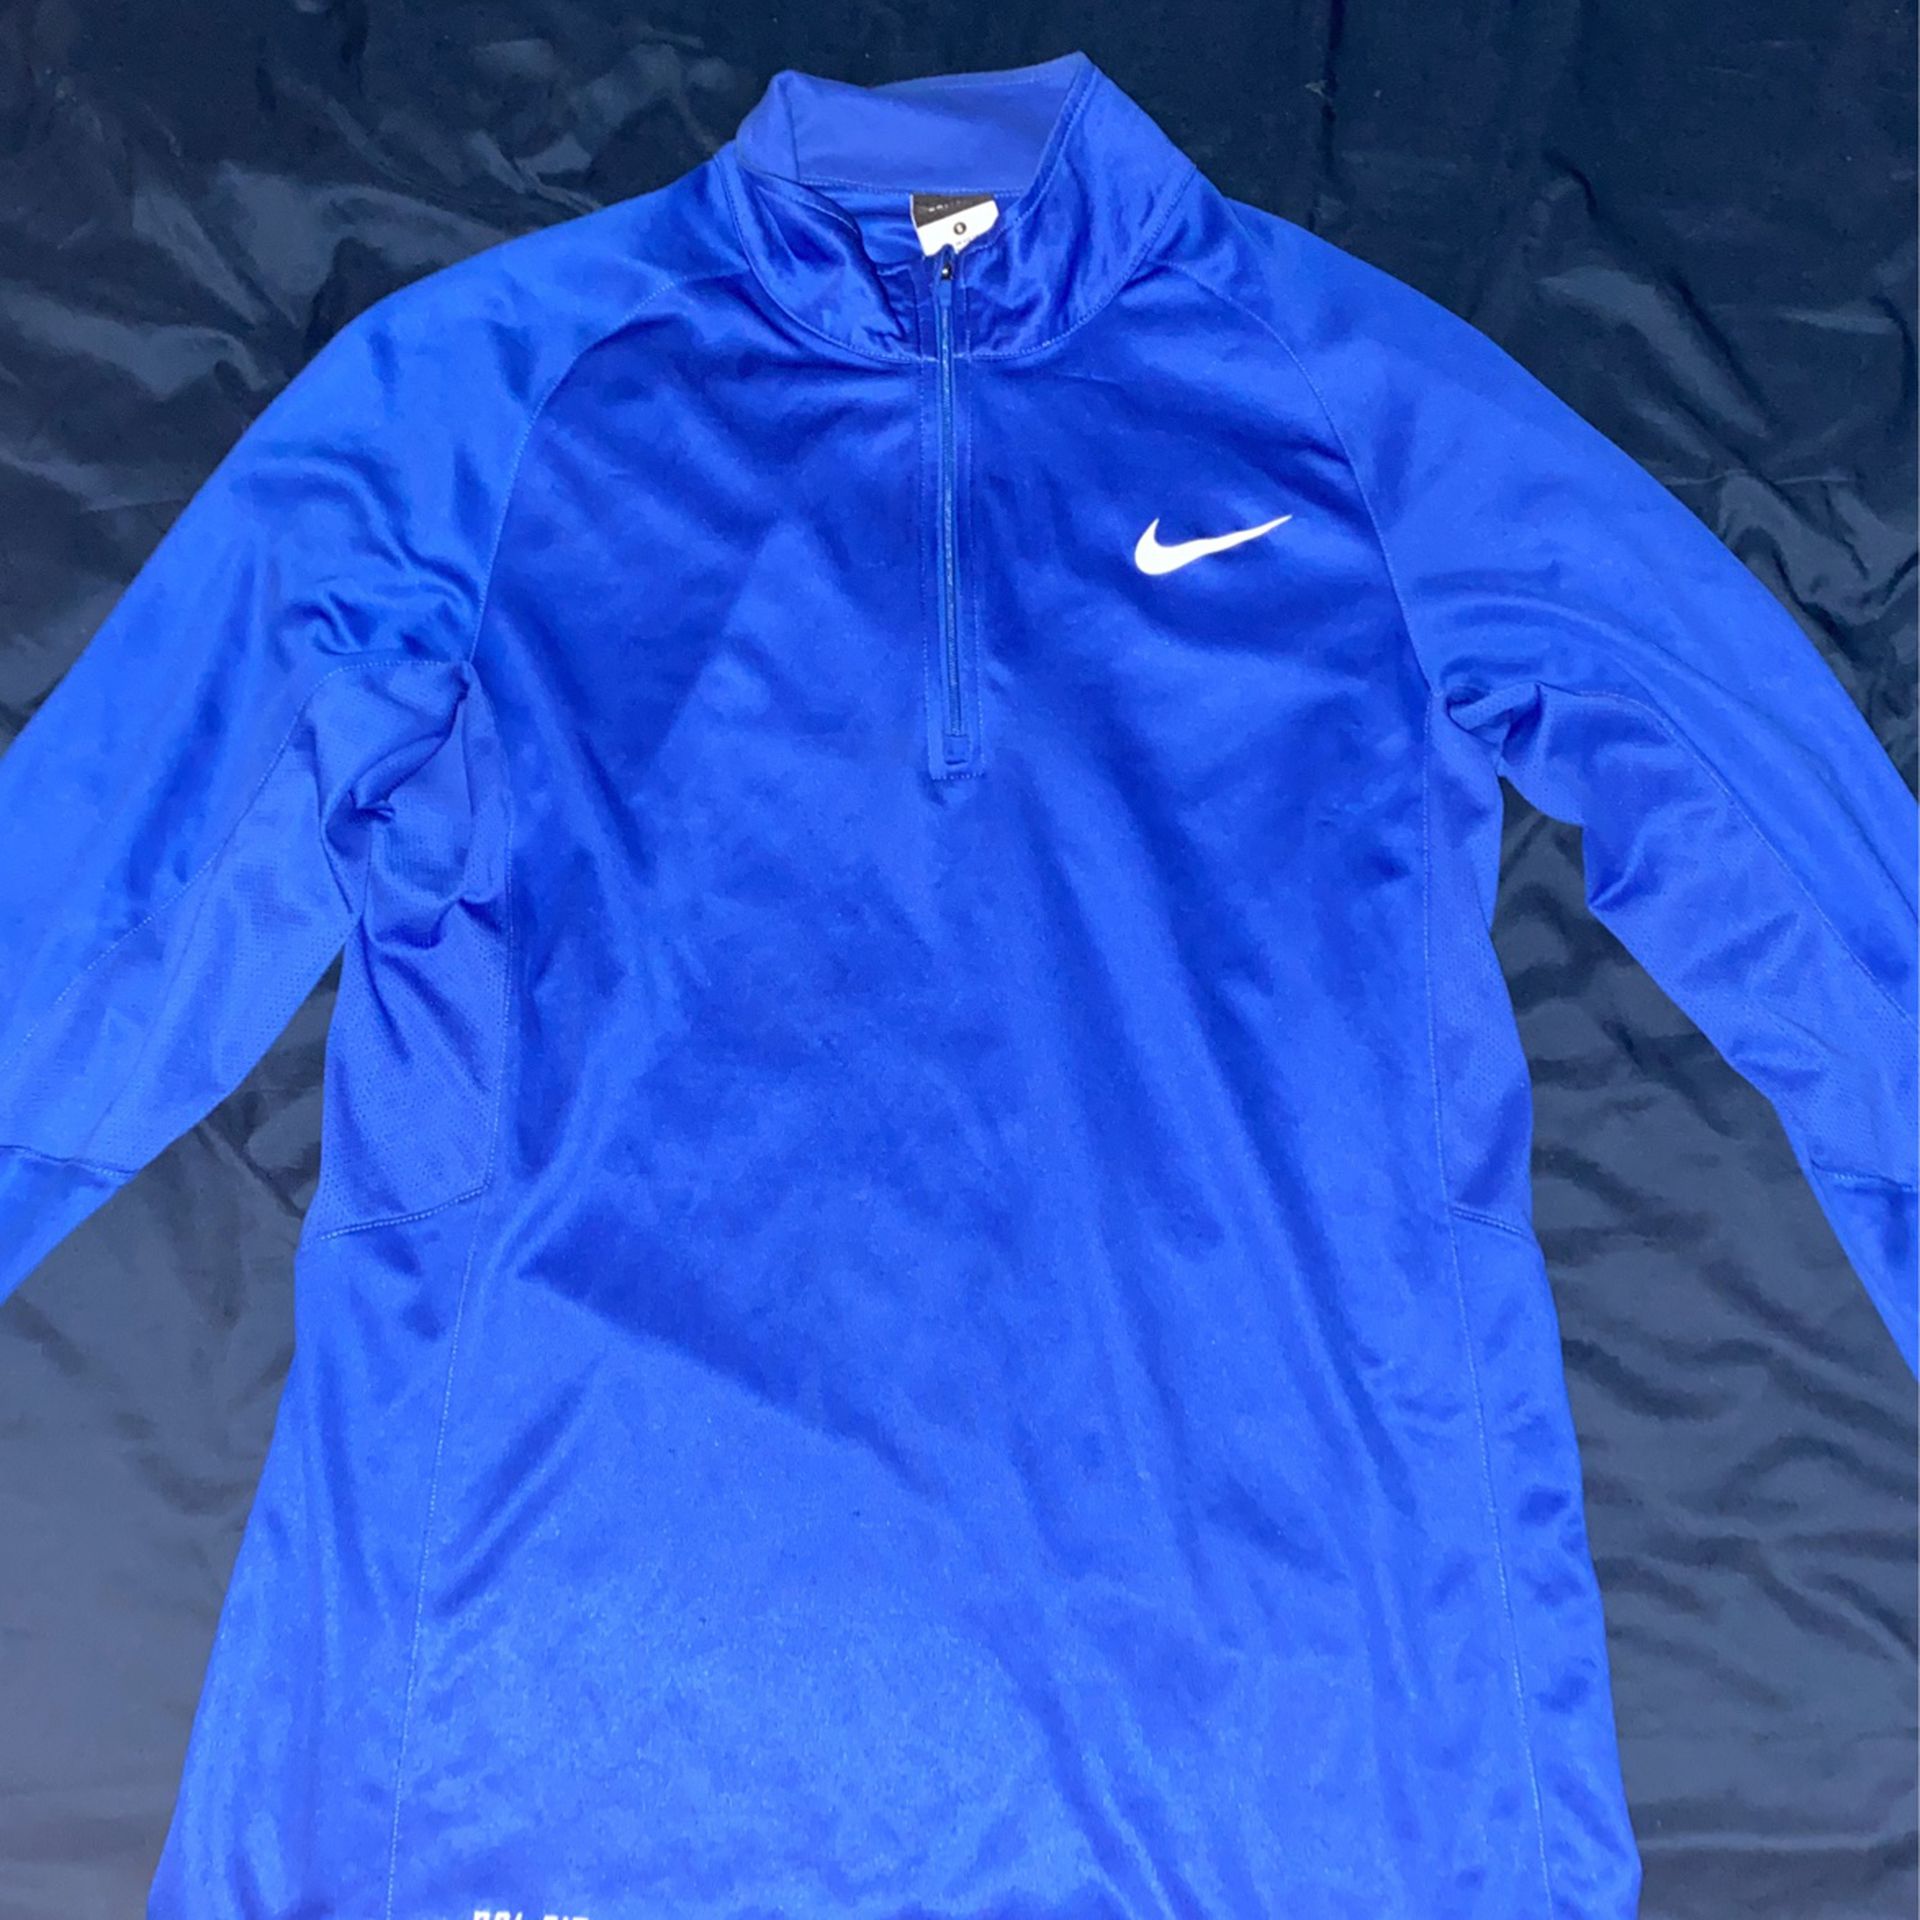 Nike 3/4 up size small for Sale in AZ - OfferUp